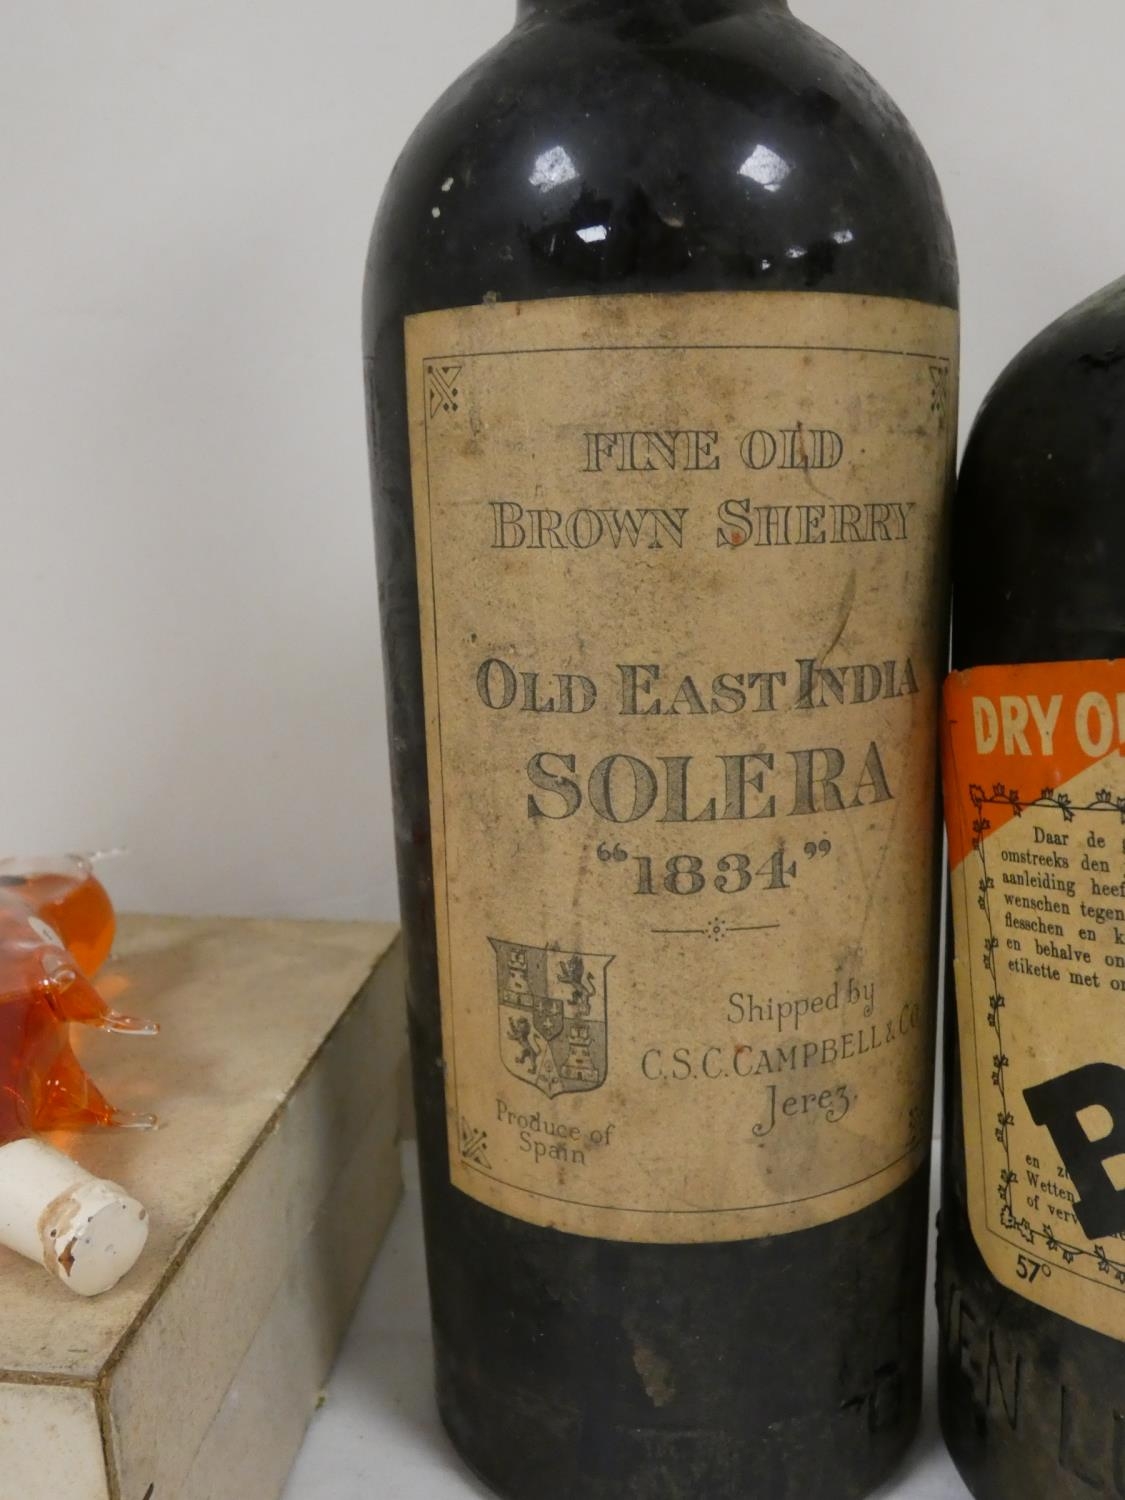 OLD EAST INDIA SOLERA '1834' fine old brown sherry (shipped by C S C Campbell & Co of Jerez), no - Image 2 of 5